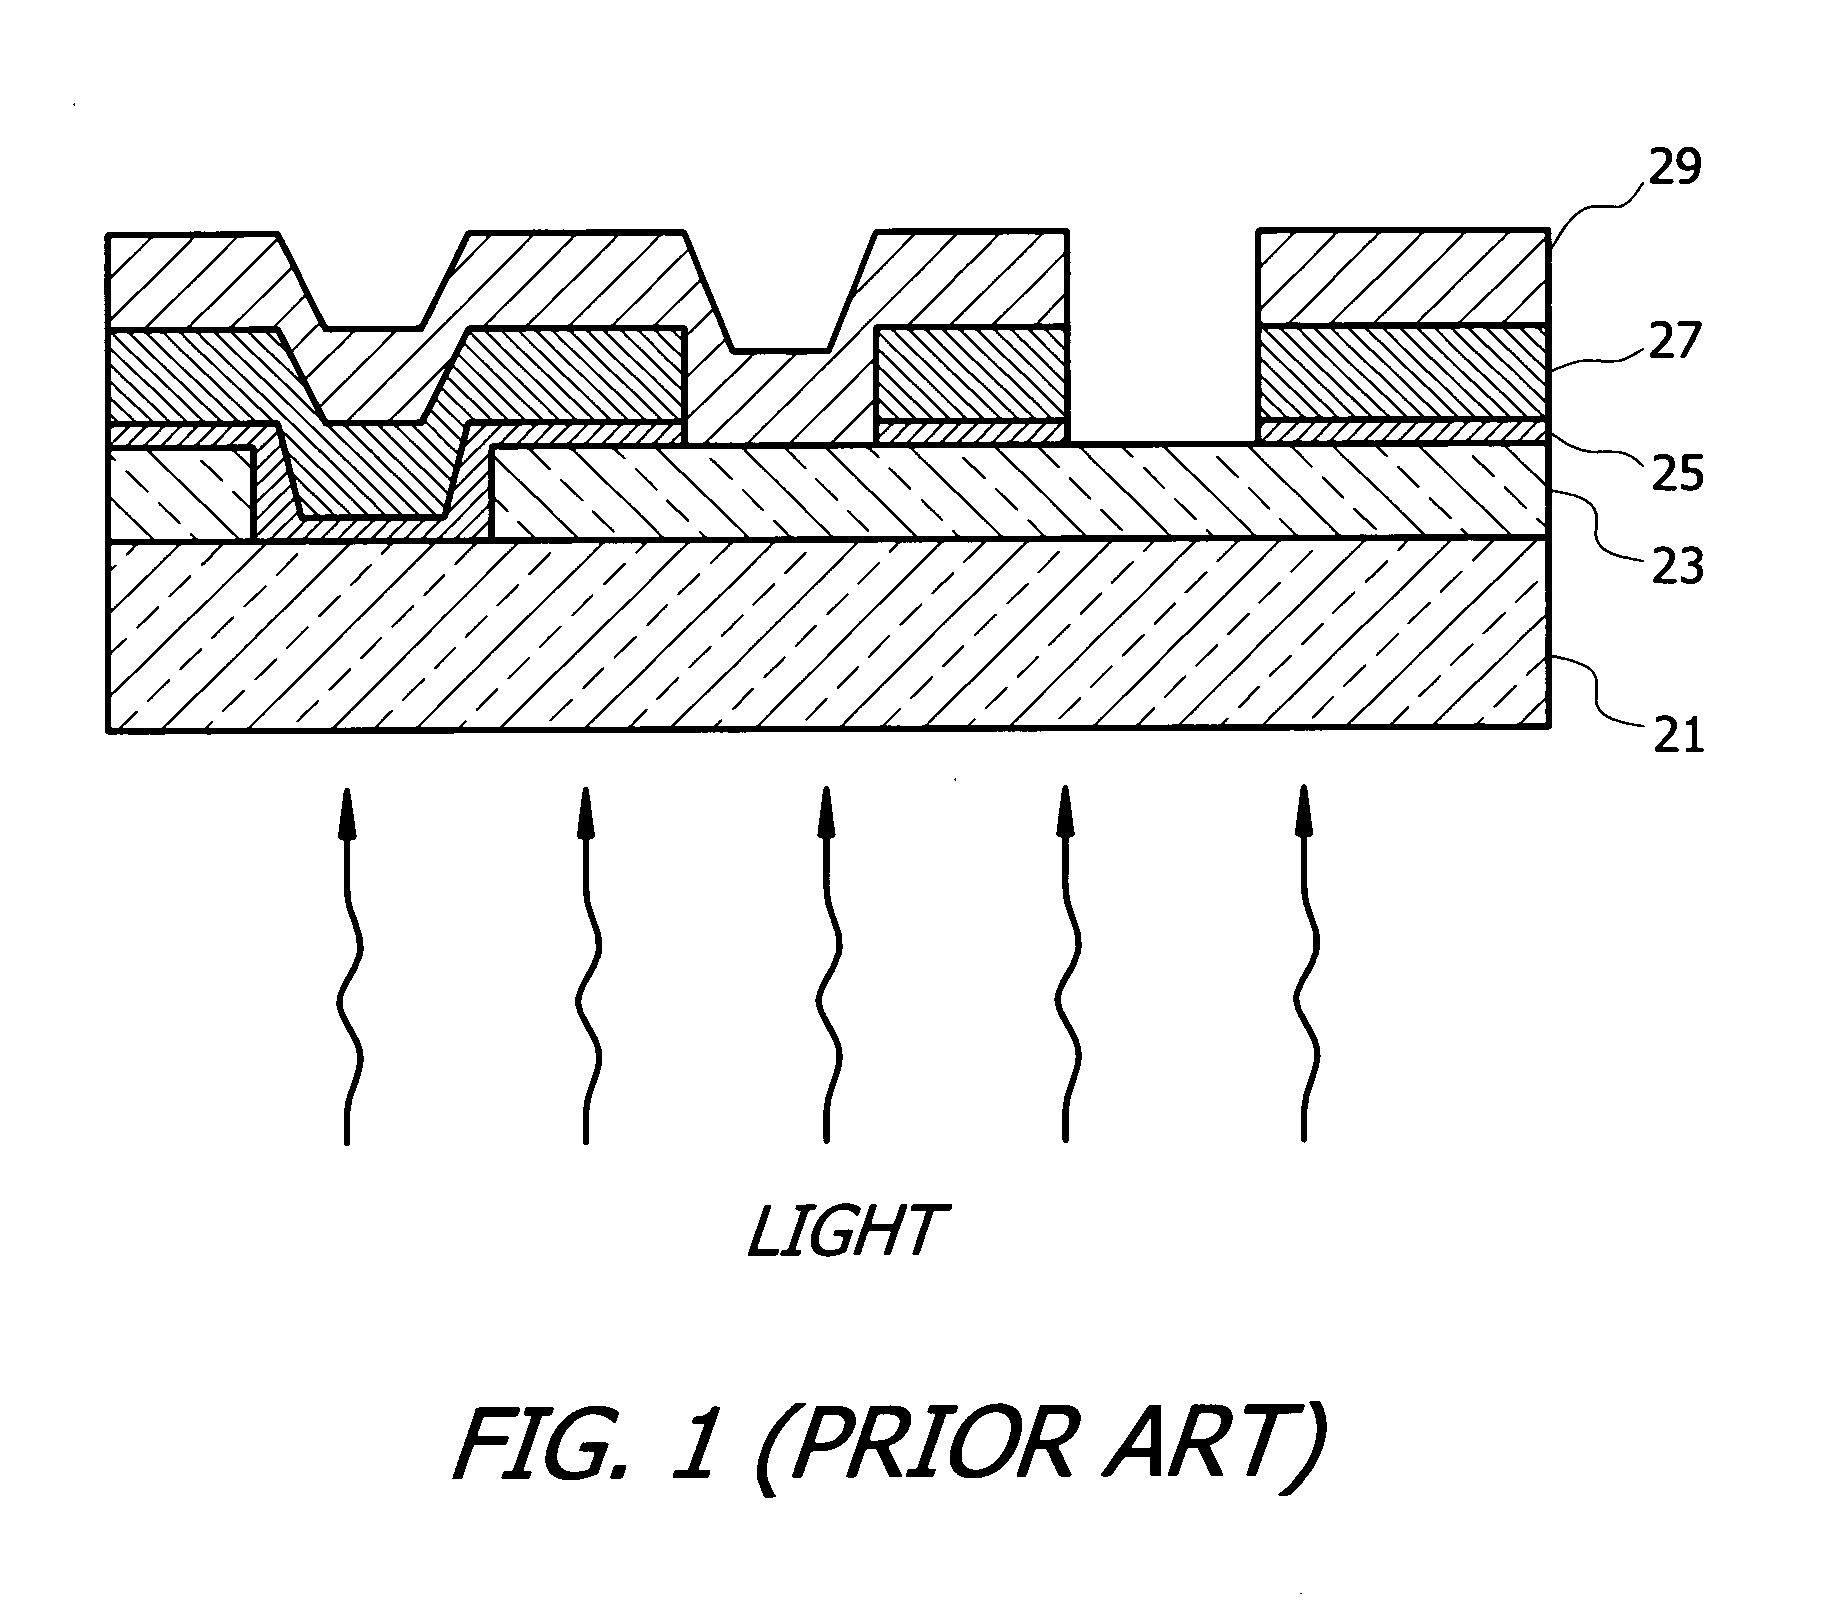 Multiple band gapped cadmium telluride photovoltaic devices and process for making the same